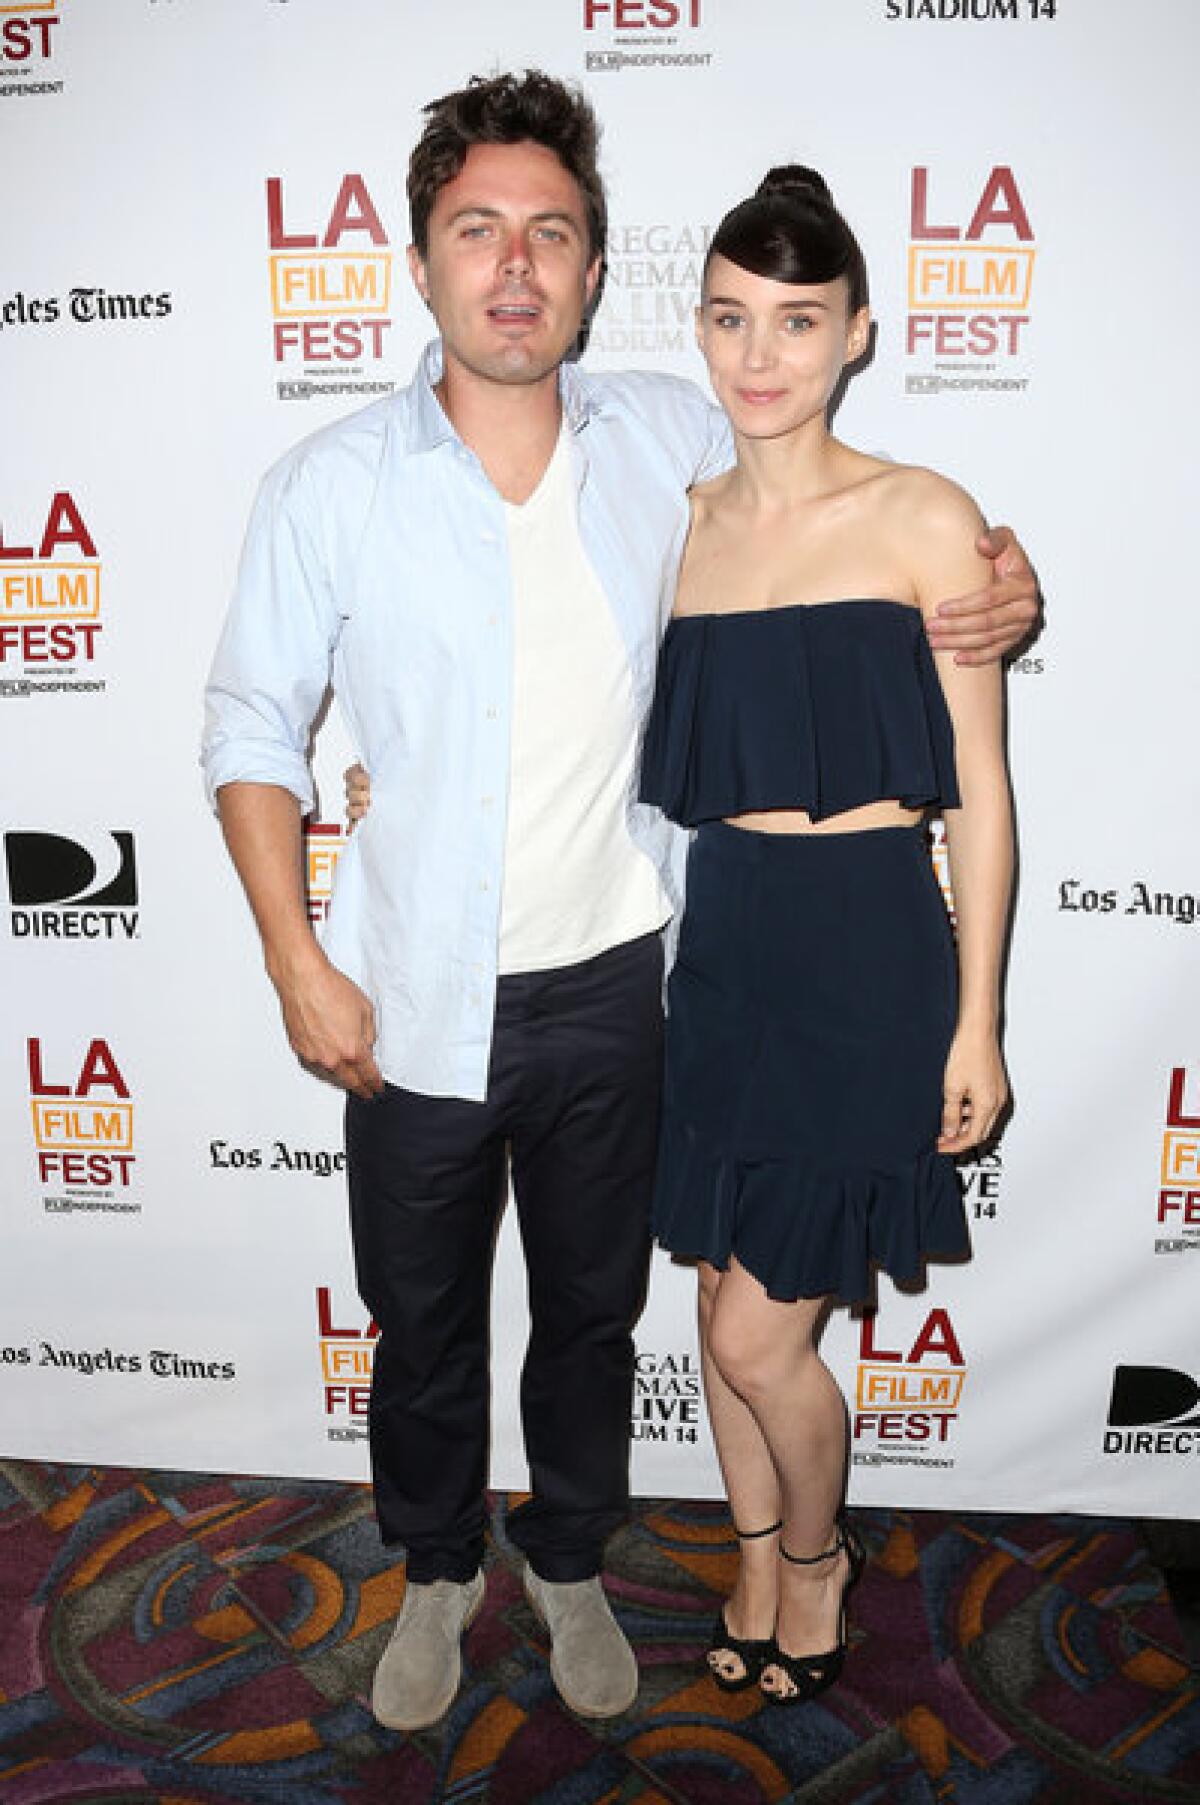 Casey Affleck, left, and Rooney Mara at the 2013 Los Angeles Film Festival screening of "Ain't Them Bodies Saints."